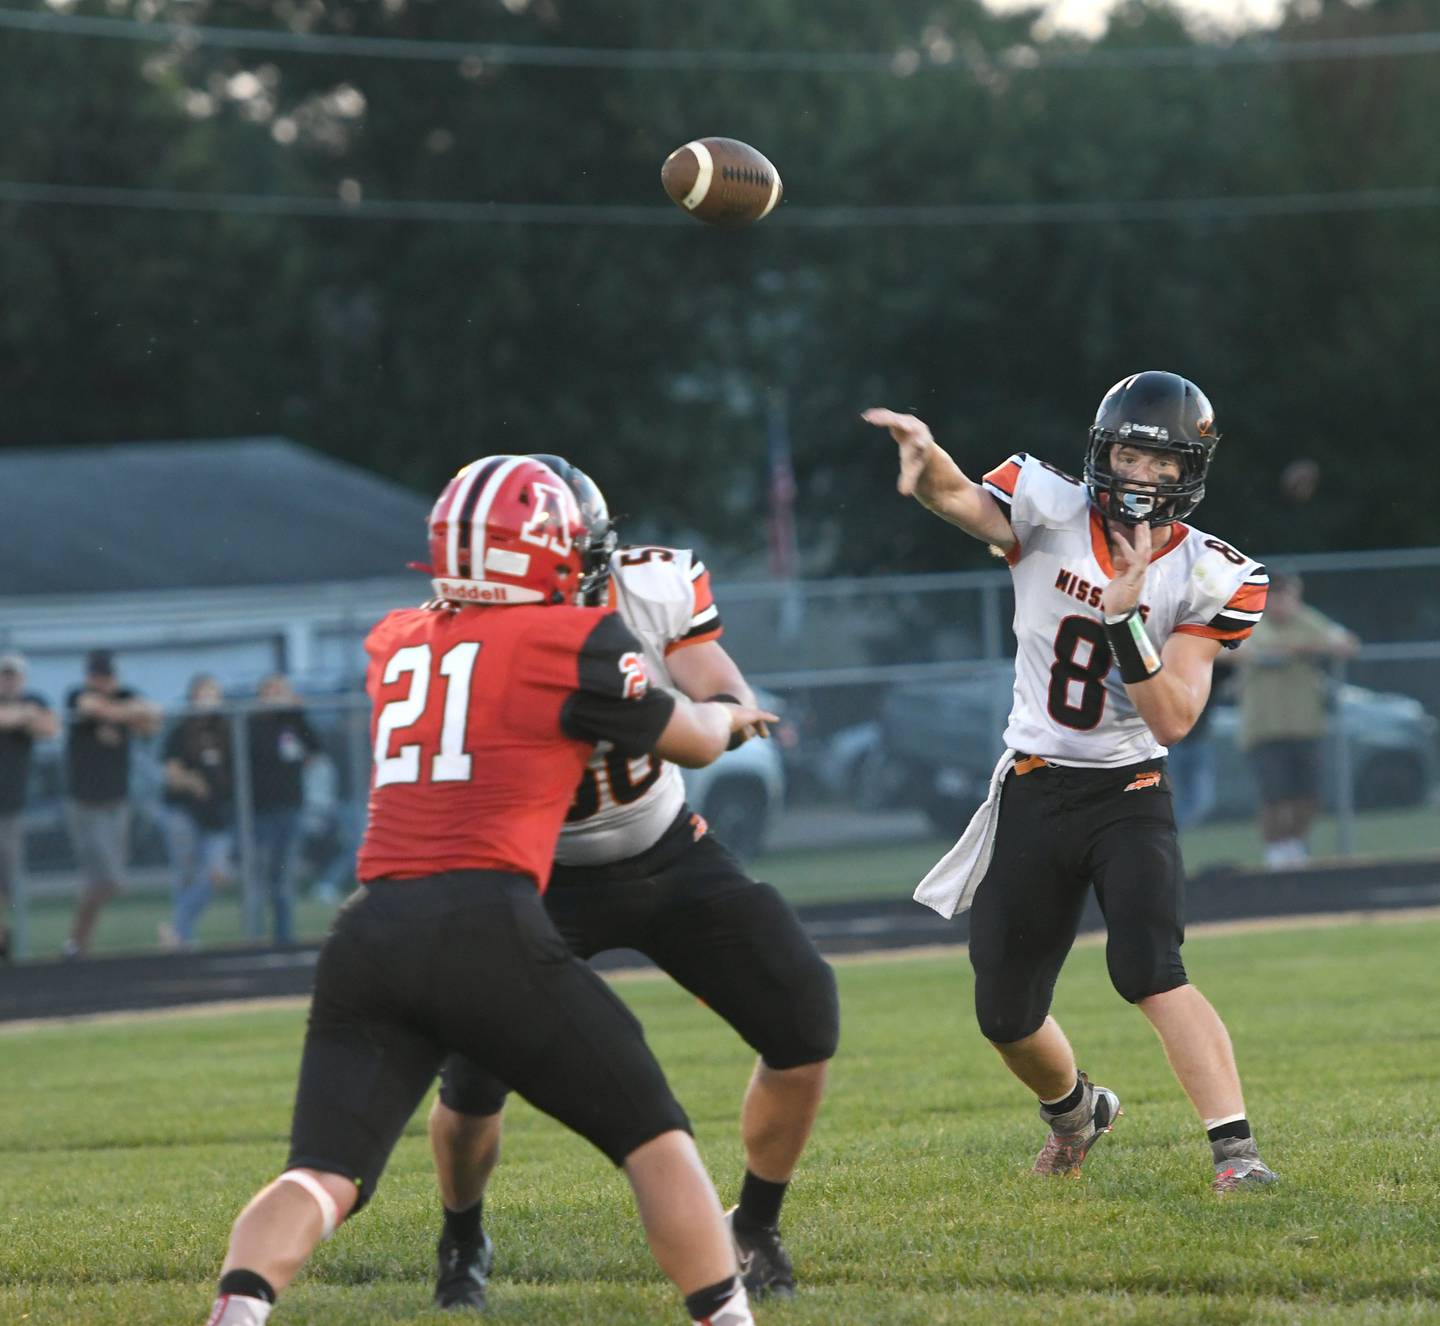 Milledgeville's Connor Nye passes the ball against Amboy on Friday. Sept. 9.